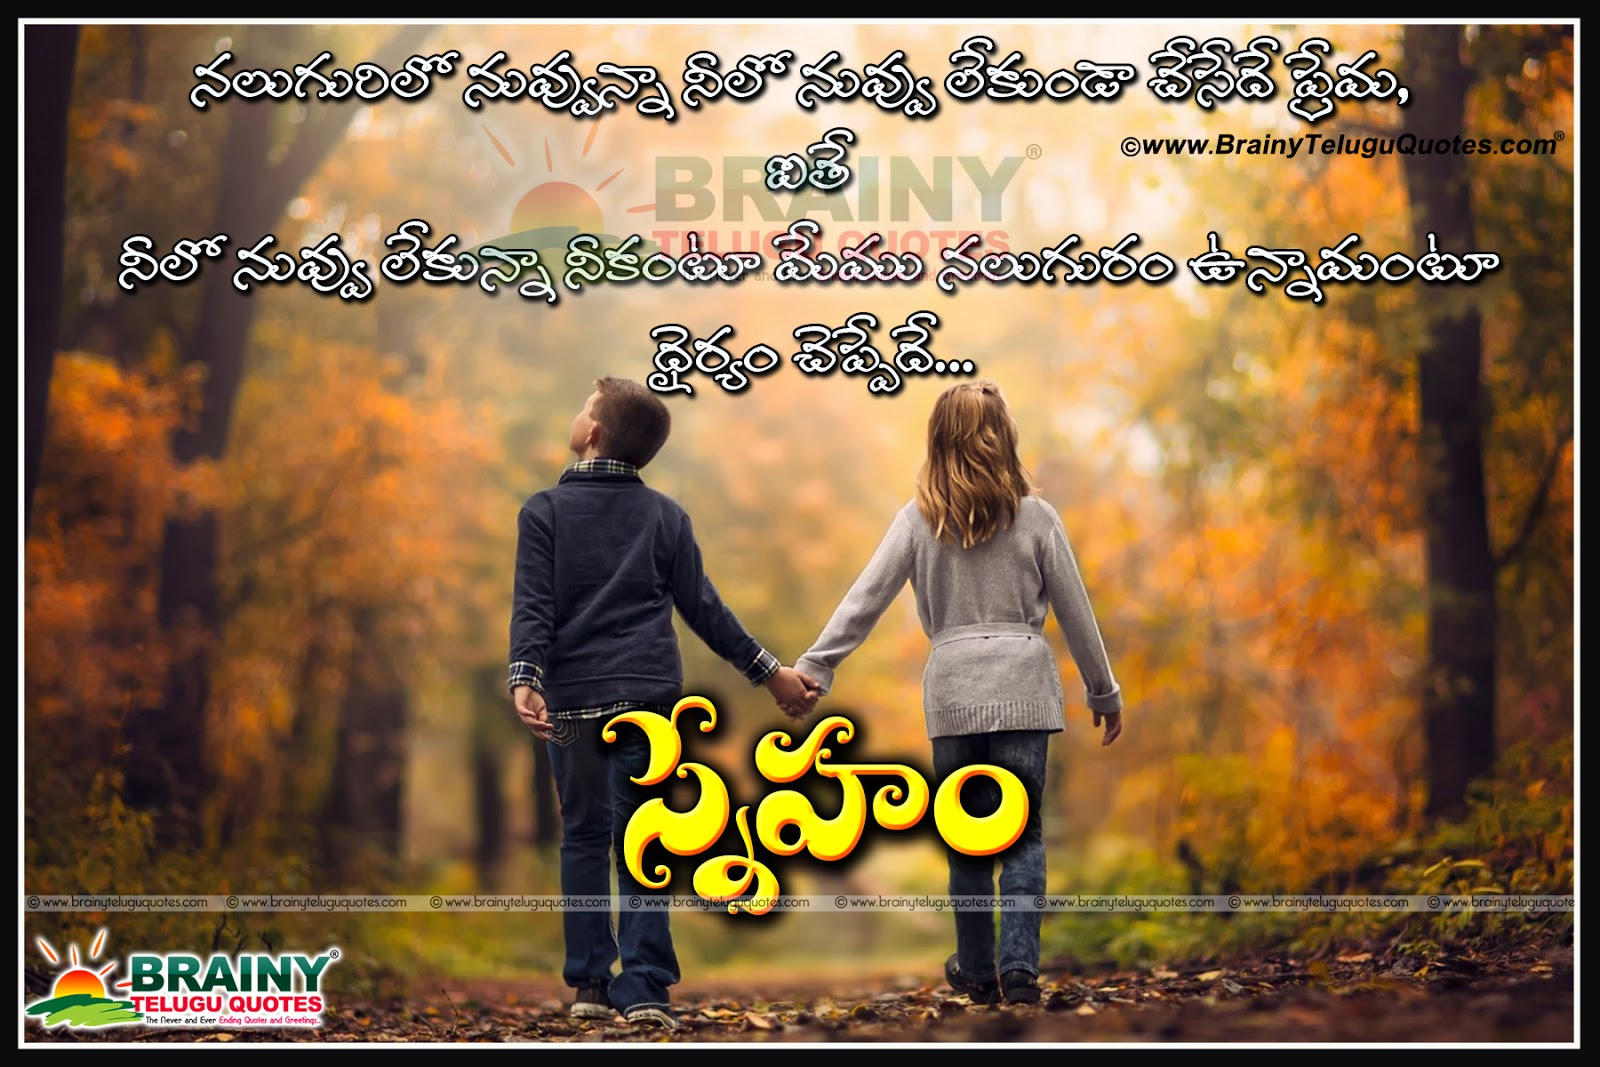 Beautiful Telugu Friendship Messages With Pictures